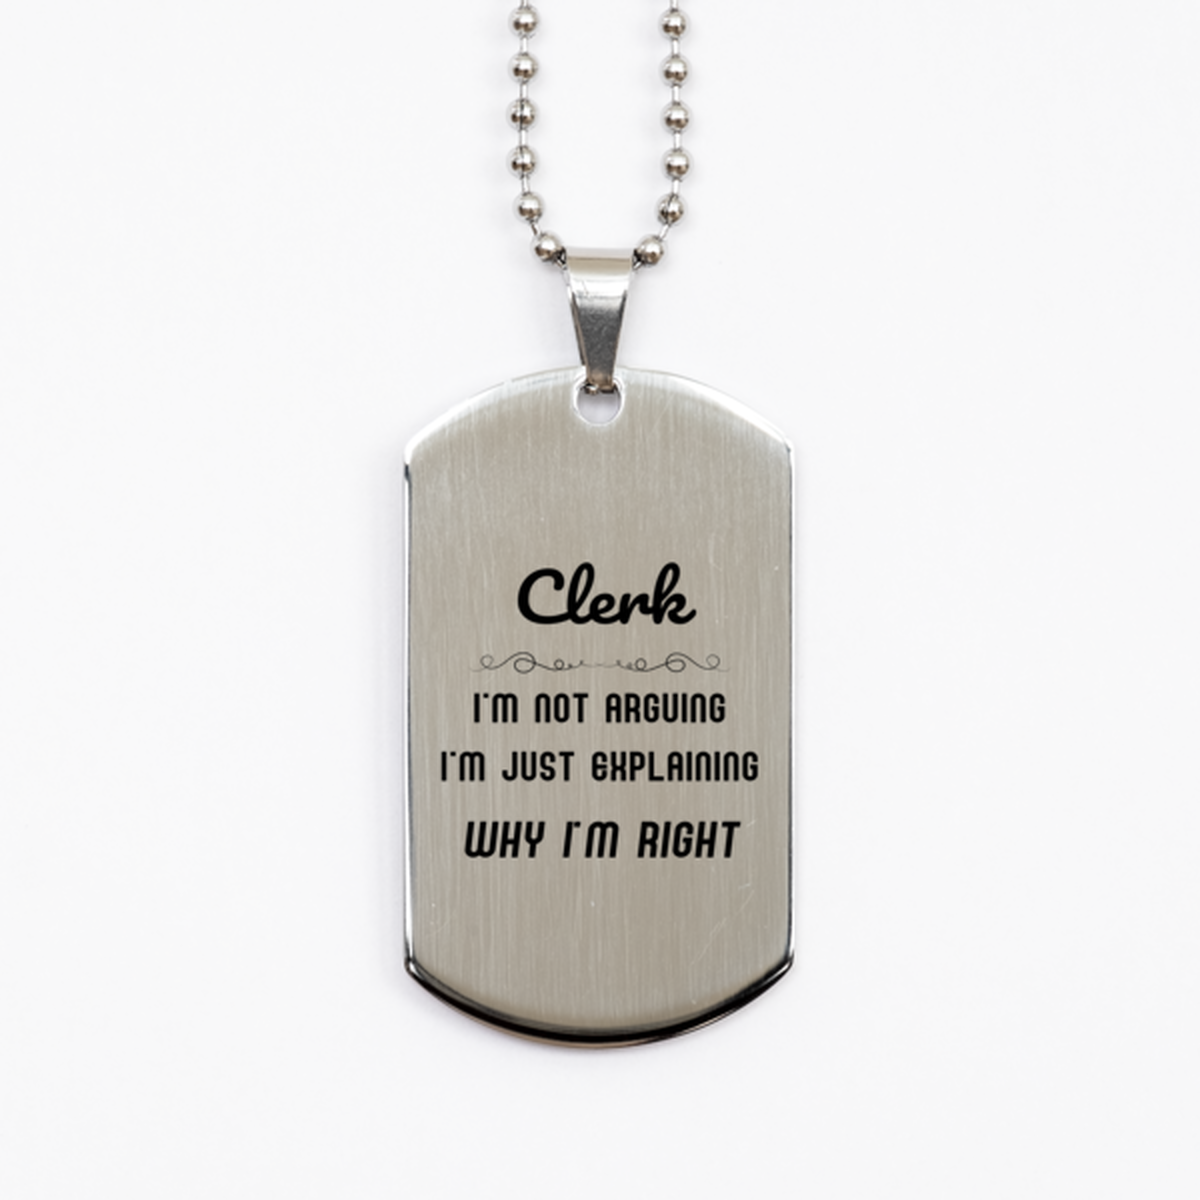 Clerk I'm not Arguing. I'm Just Explaining Why I'm RIGHT Silver Dog Tag, Funny Saying Quote Clerk Gifts For Clerk Graduation Birthday Christmas Gifts for Men Women Coworker